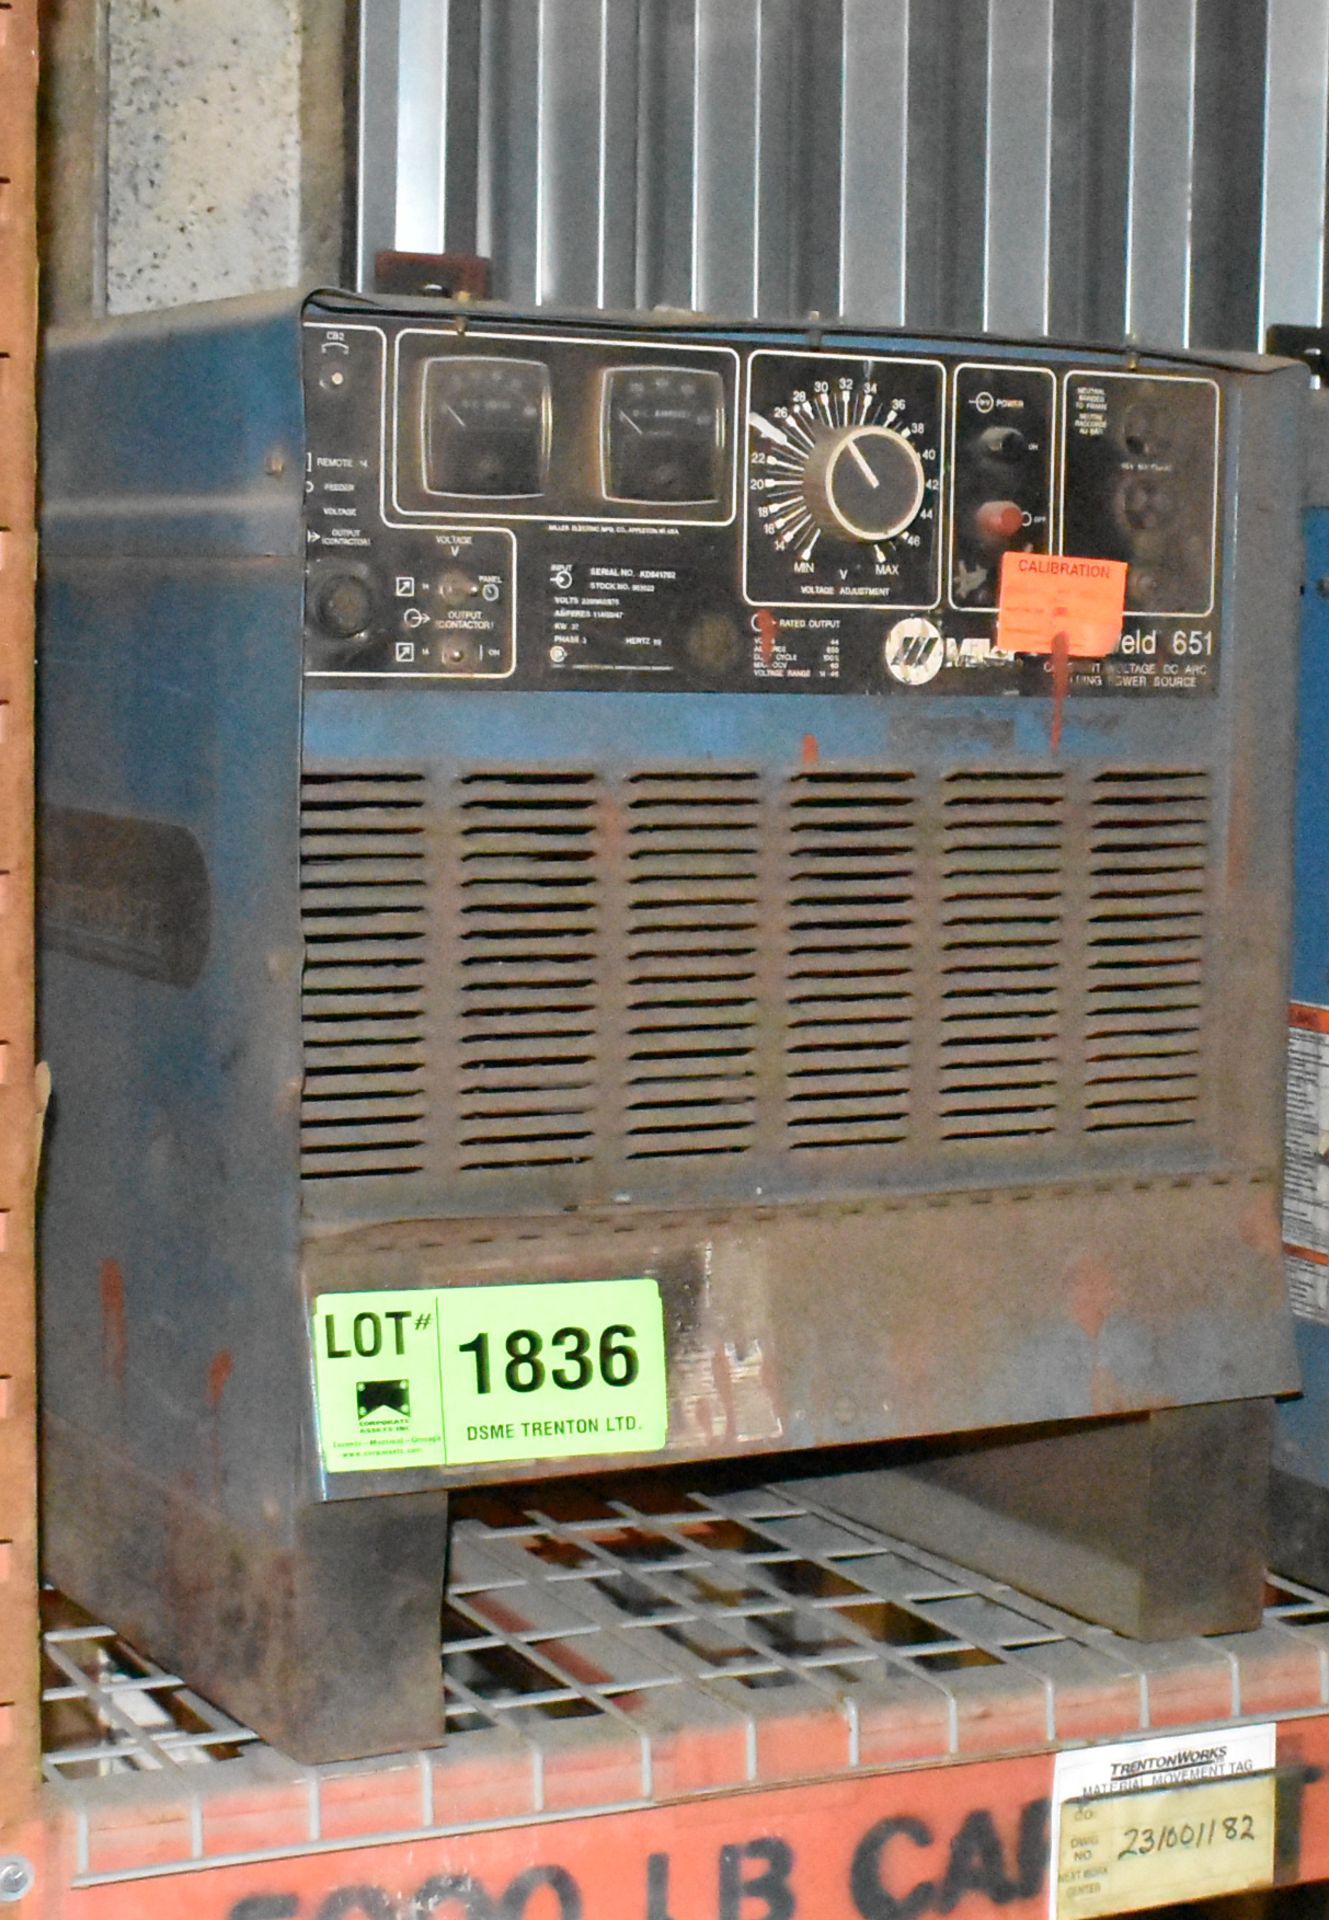 MILLER DELTAWELD 451 WELDING POWER SOURCE [RIGGING FEE FOR LOT# 1836 - $40 USD +PLUS TAXES]